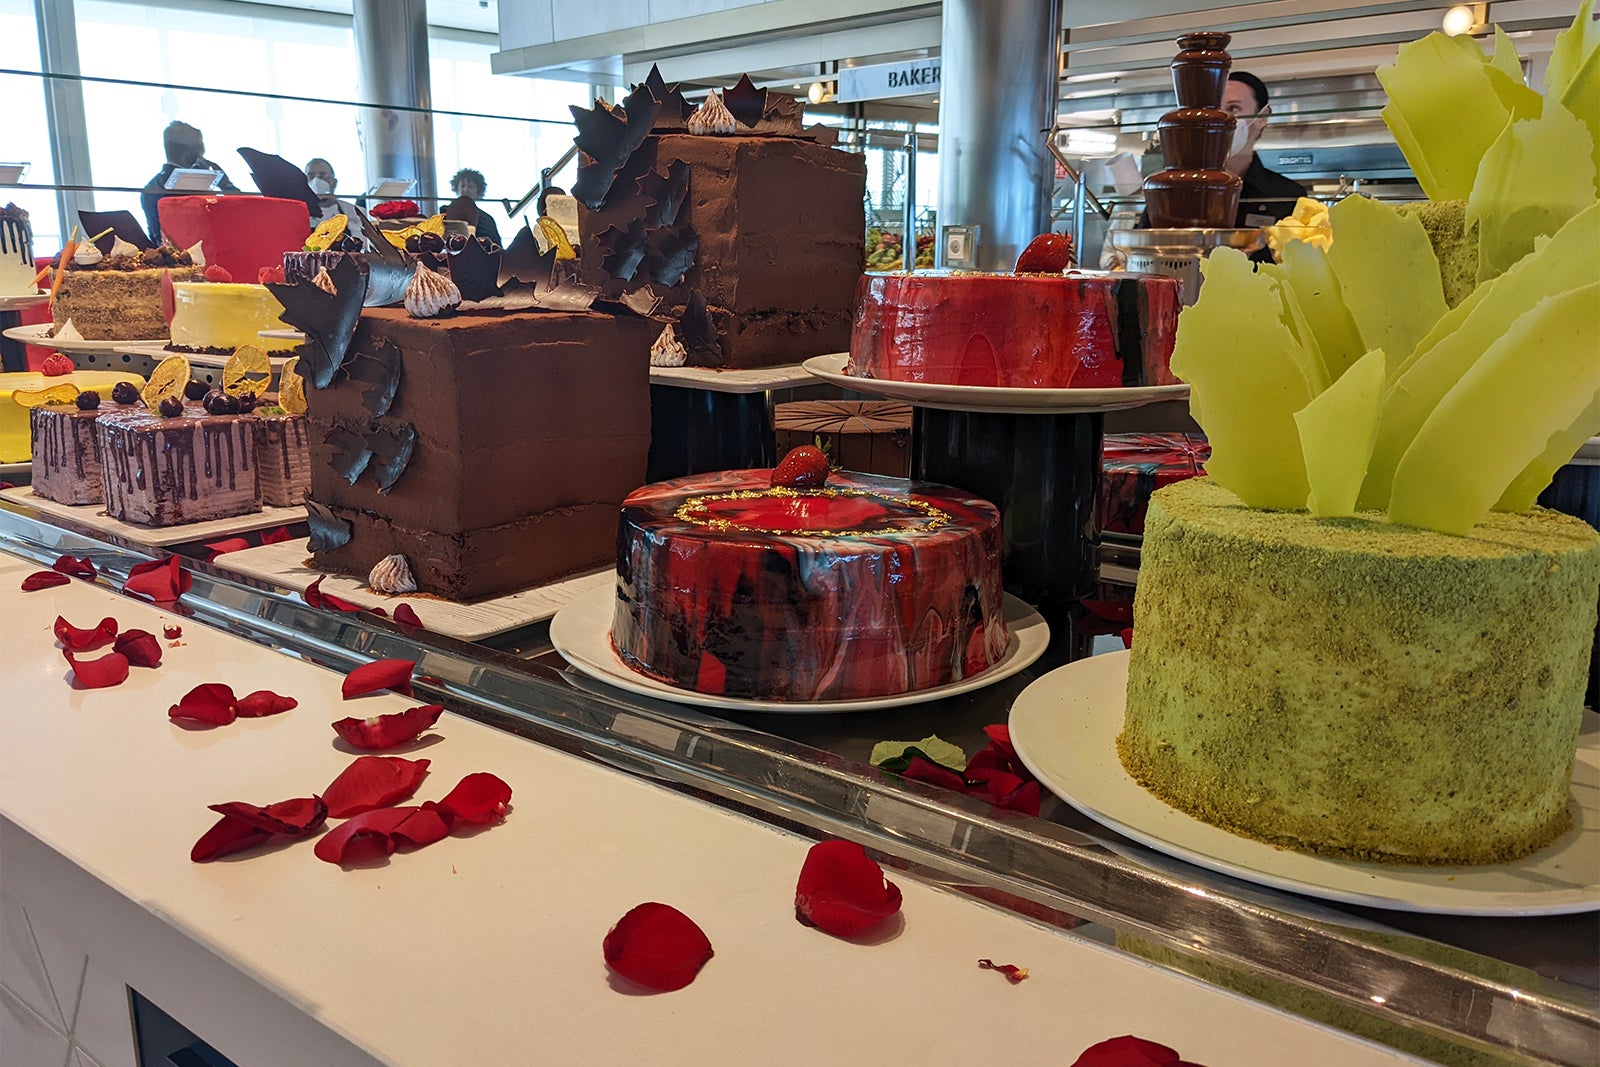 Fancy cakes in a row on a buffet counter